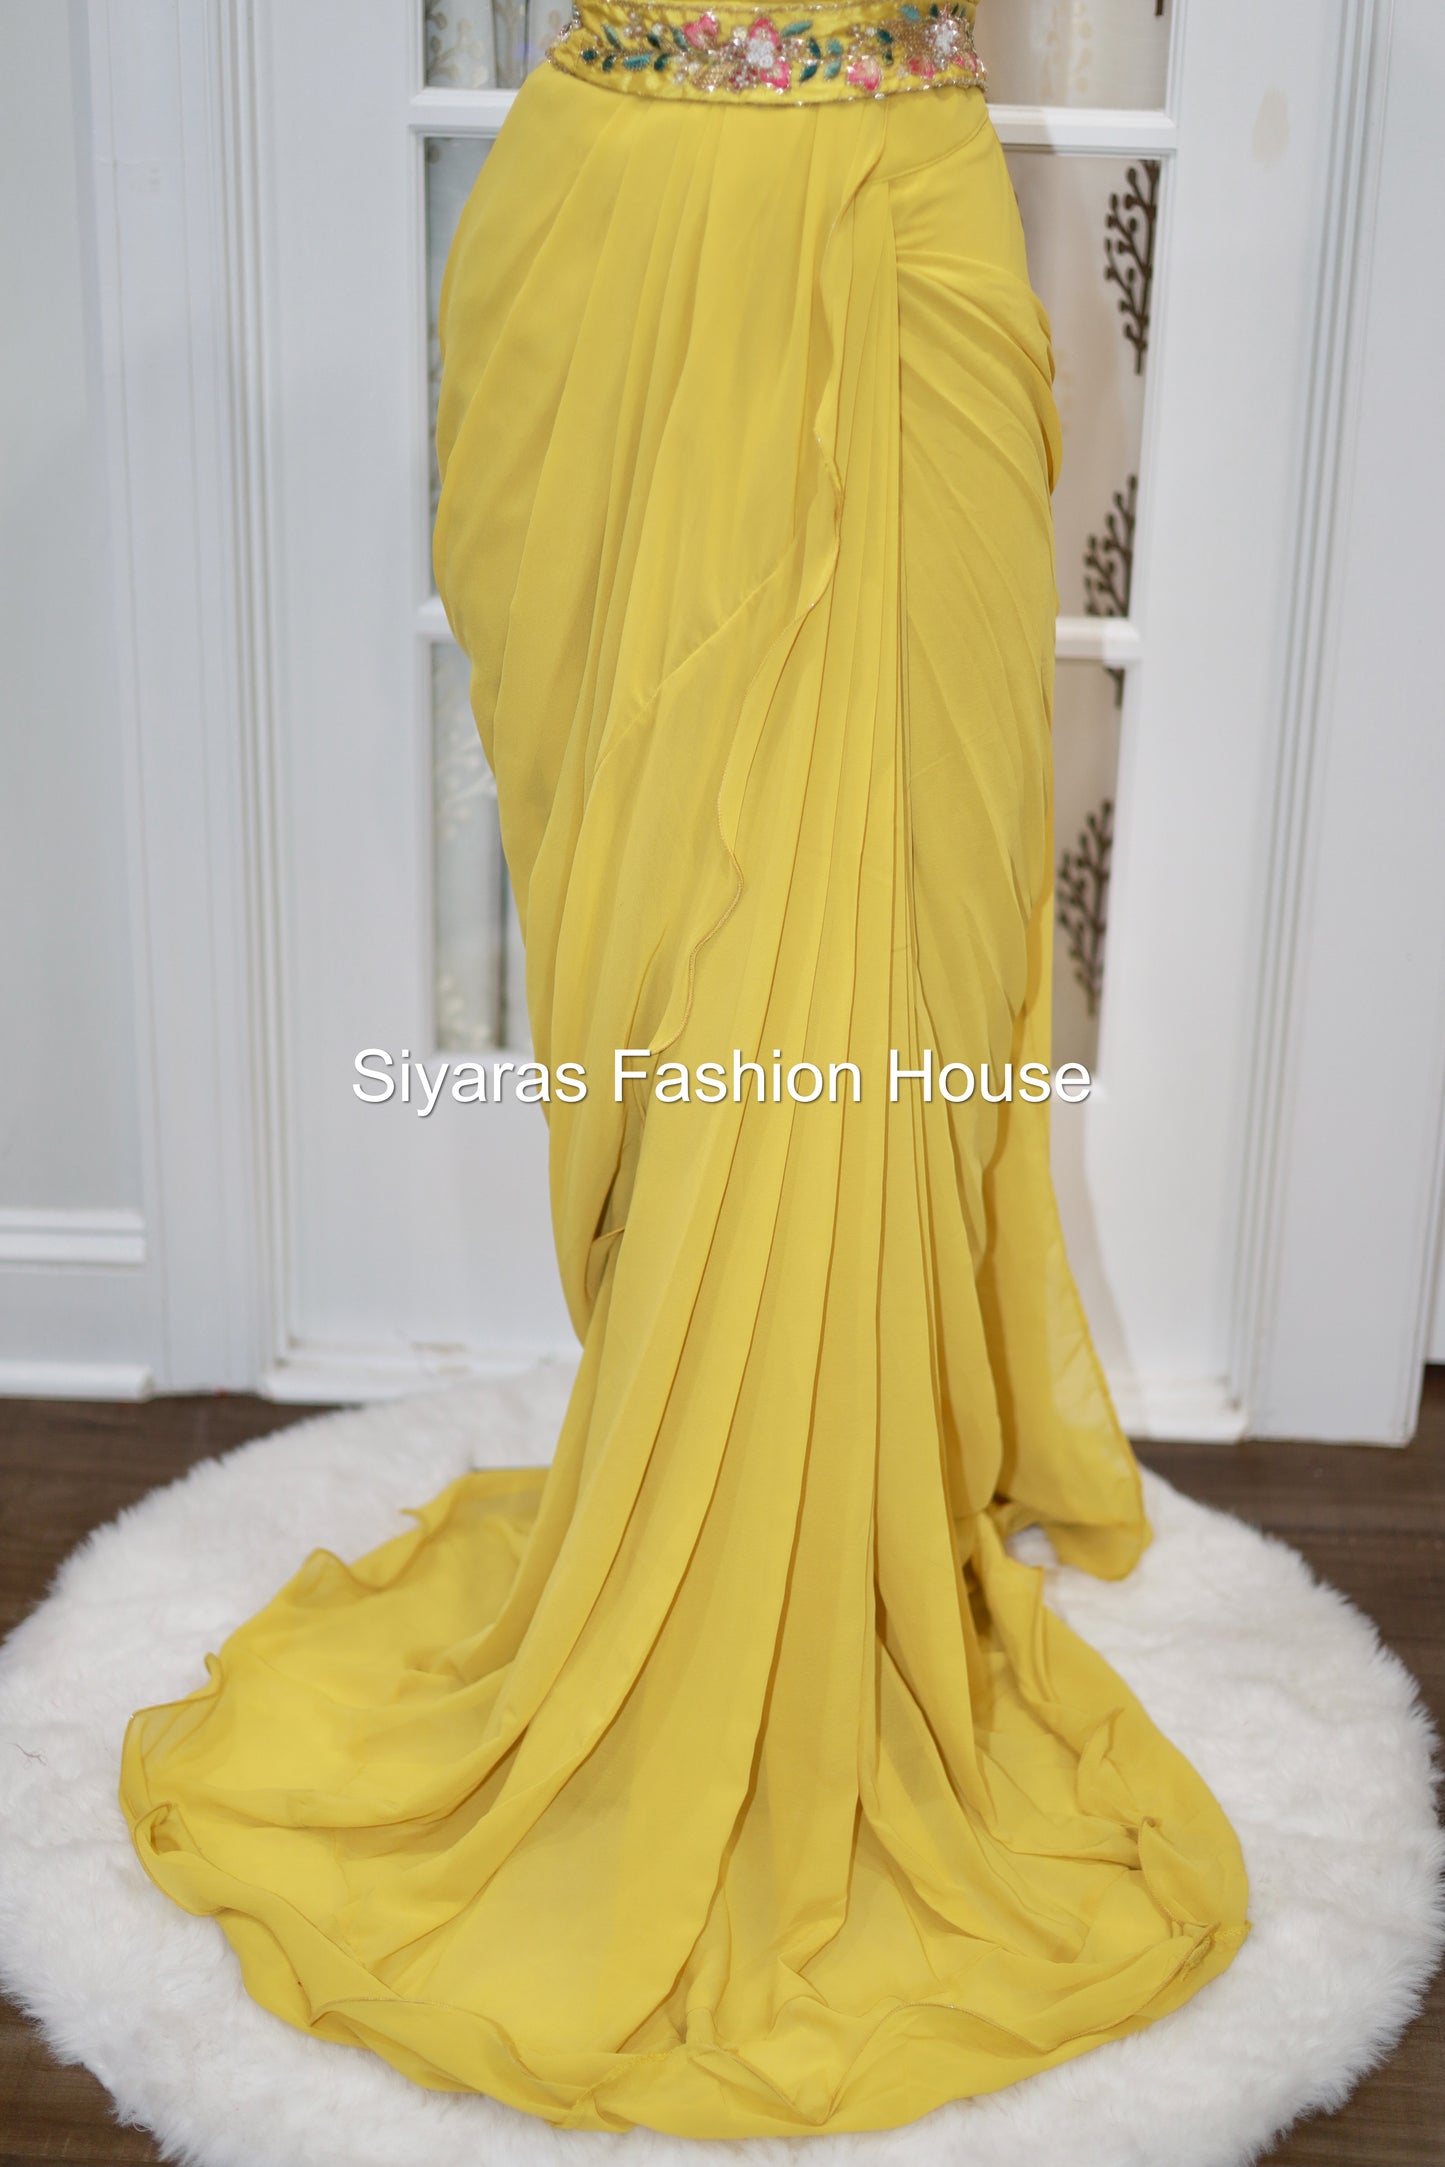 Chic and Trendy Elegant Ruffle saree Reqdy to wear in yellow color for Partywear/wedding function.